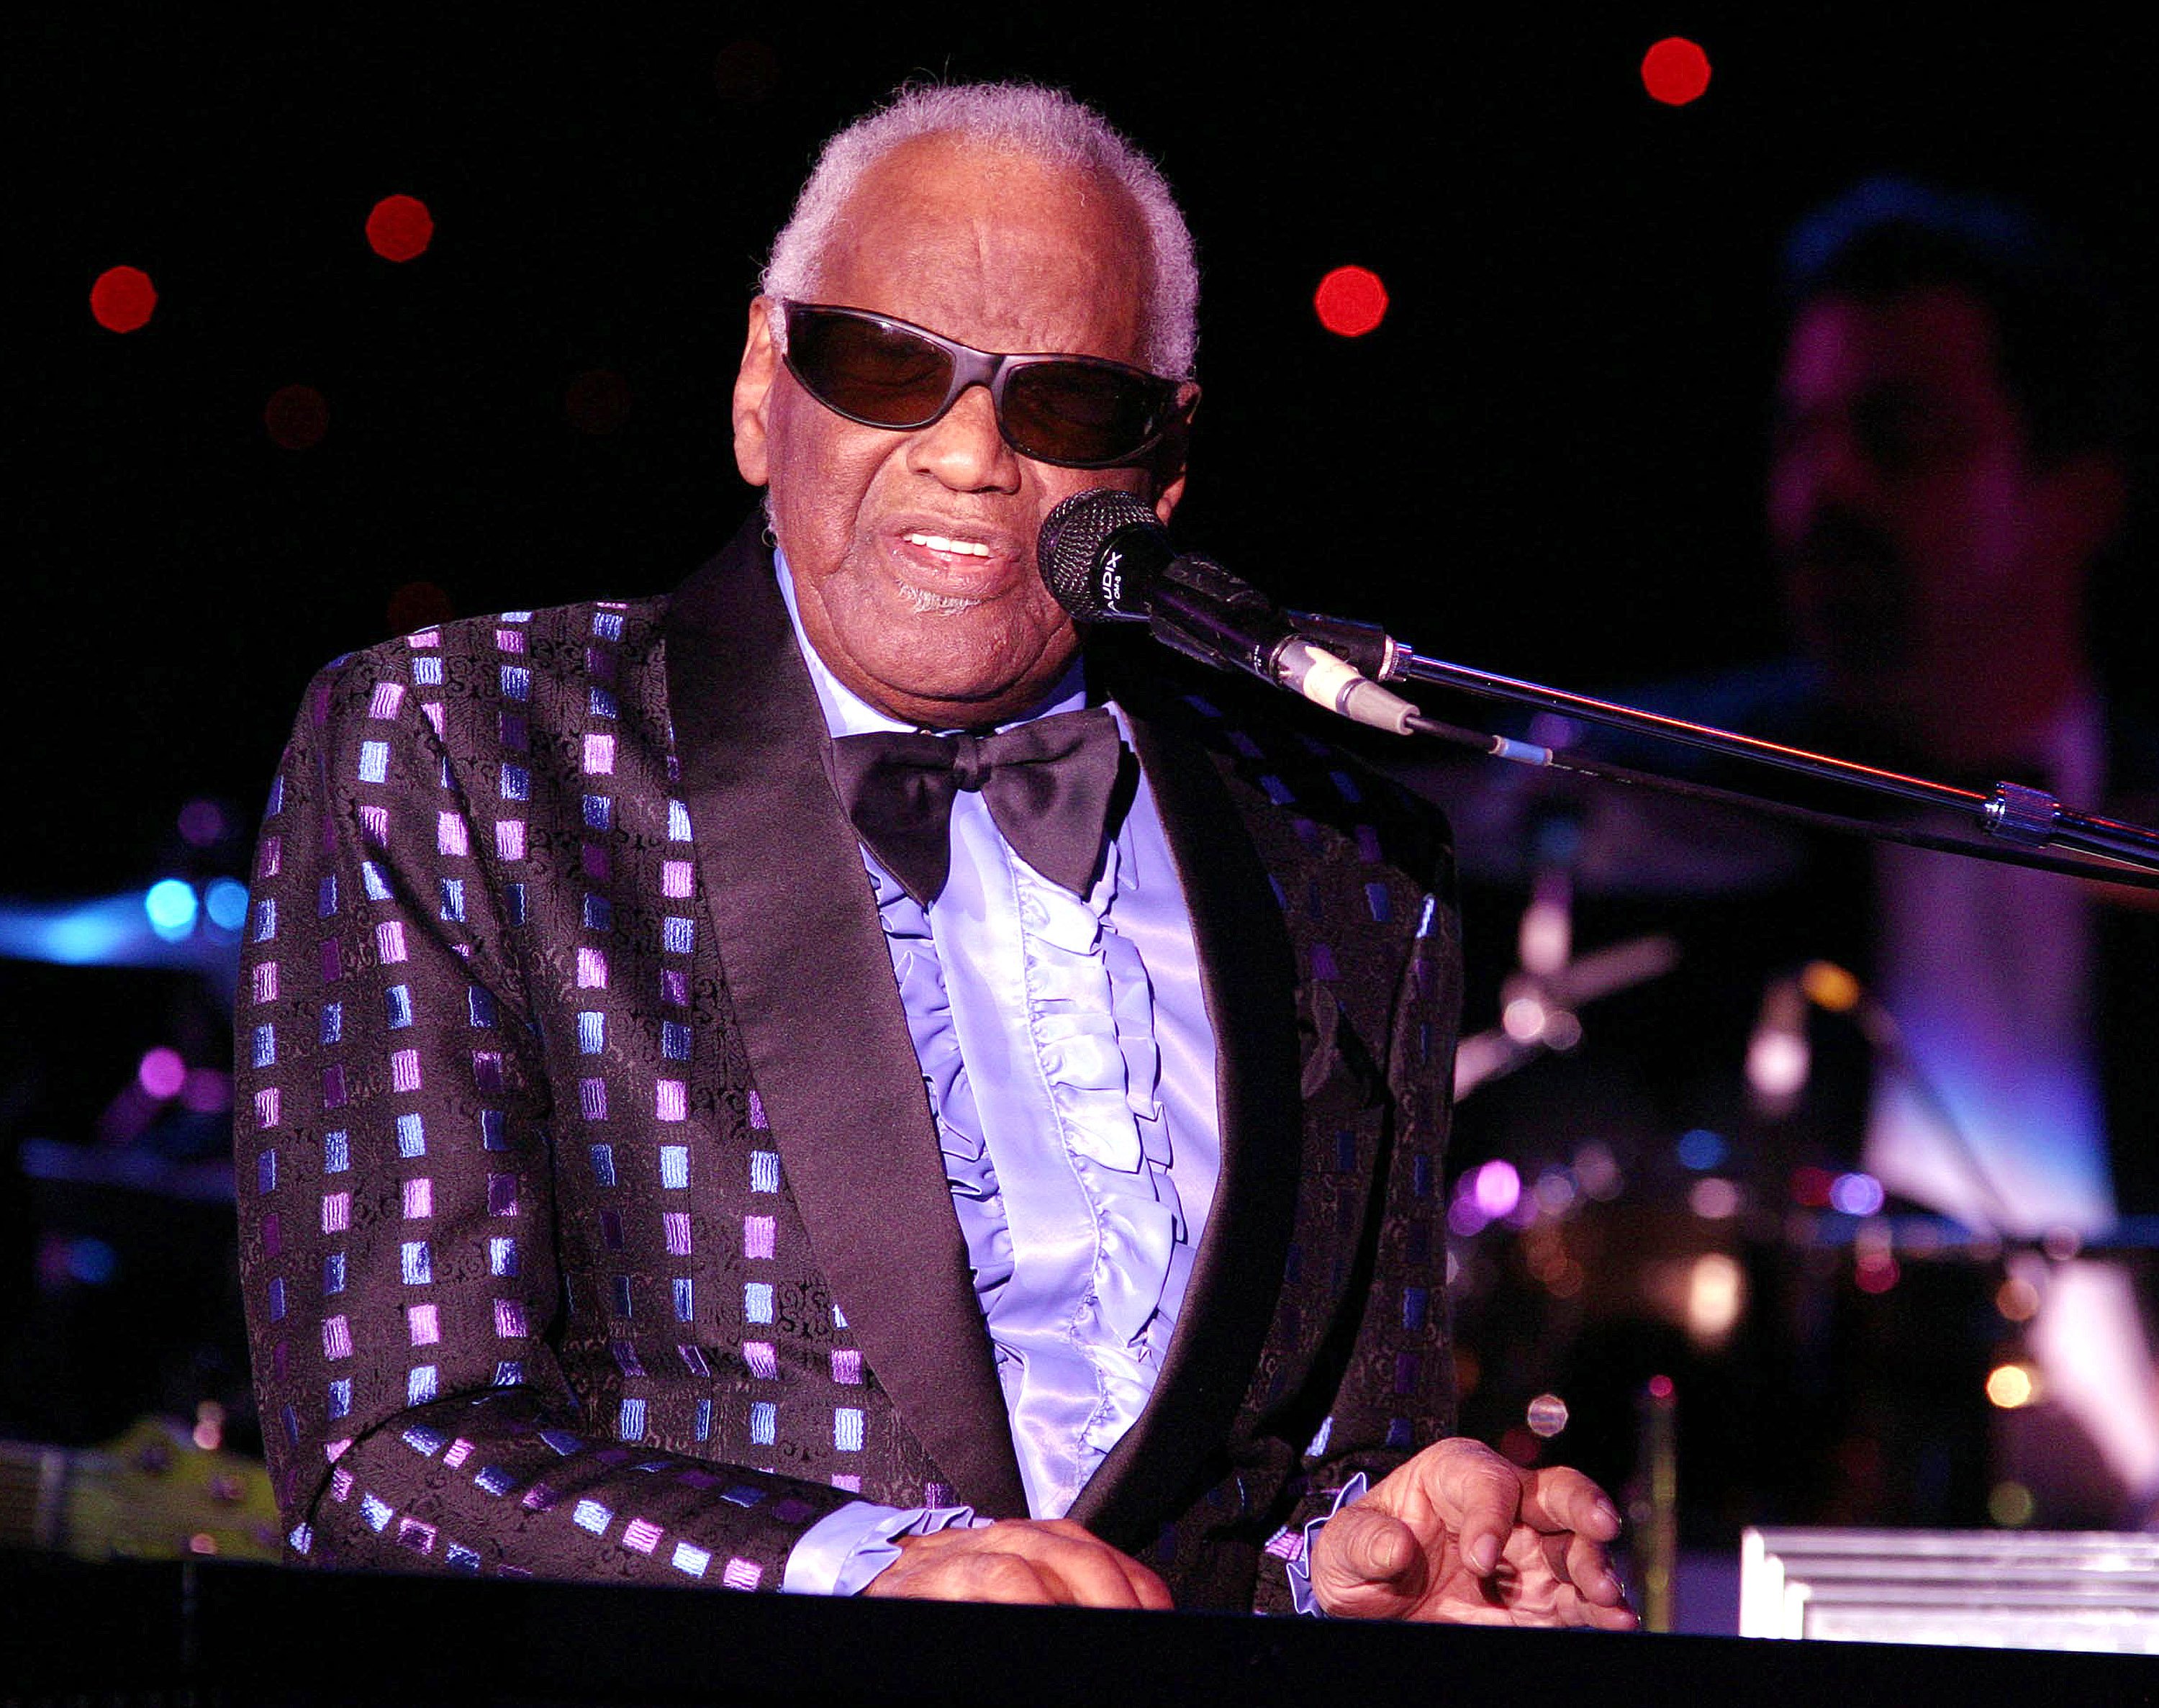 Ray Charles in Concert at Resorts Atlantic City in Atlantic City, New Jersey, United States on July 10, 2003. | Source: Getty Images